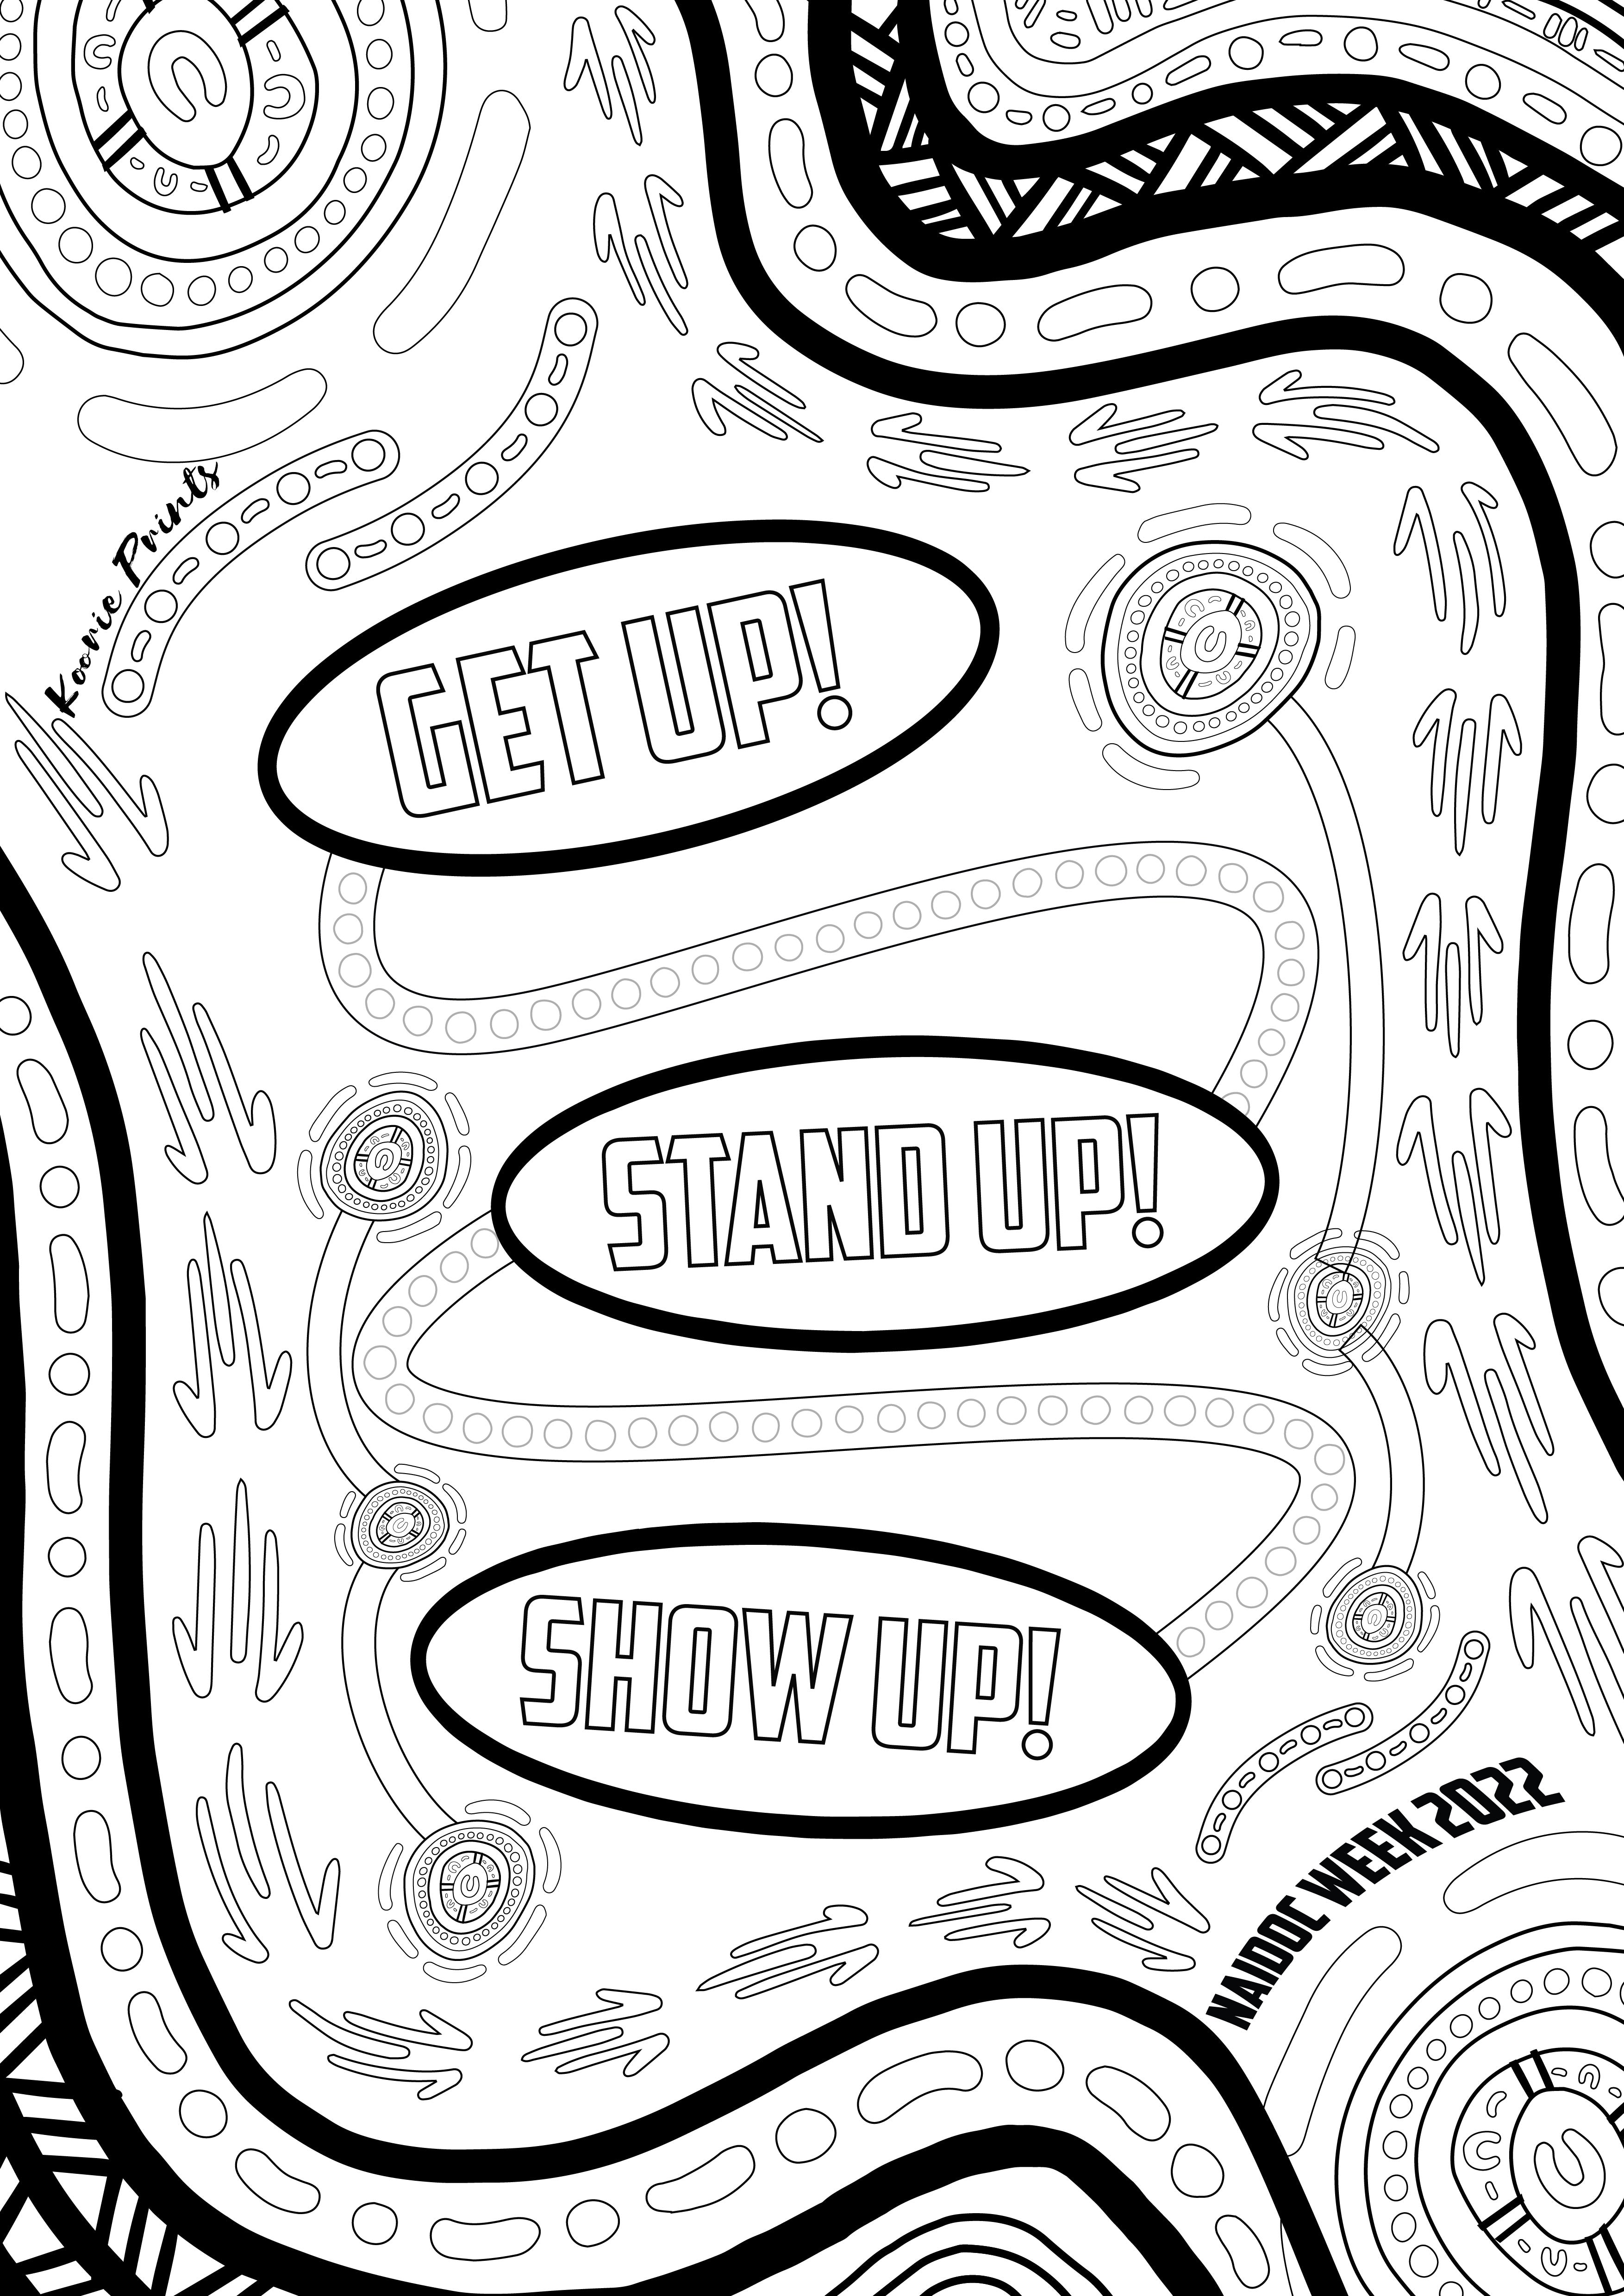 Free get up stand up show up colouring page printable digital downlo â koorie prints